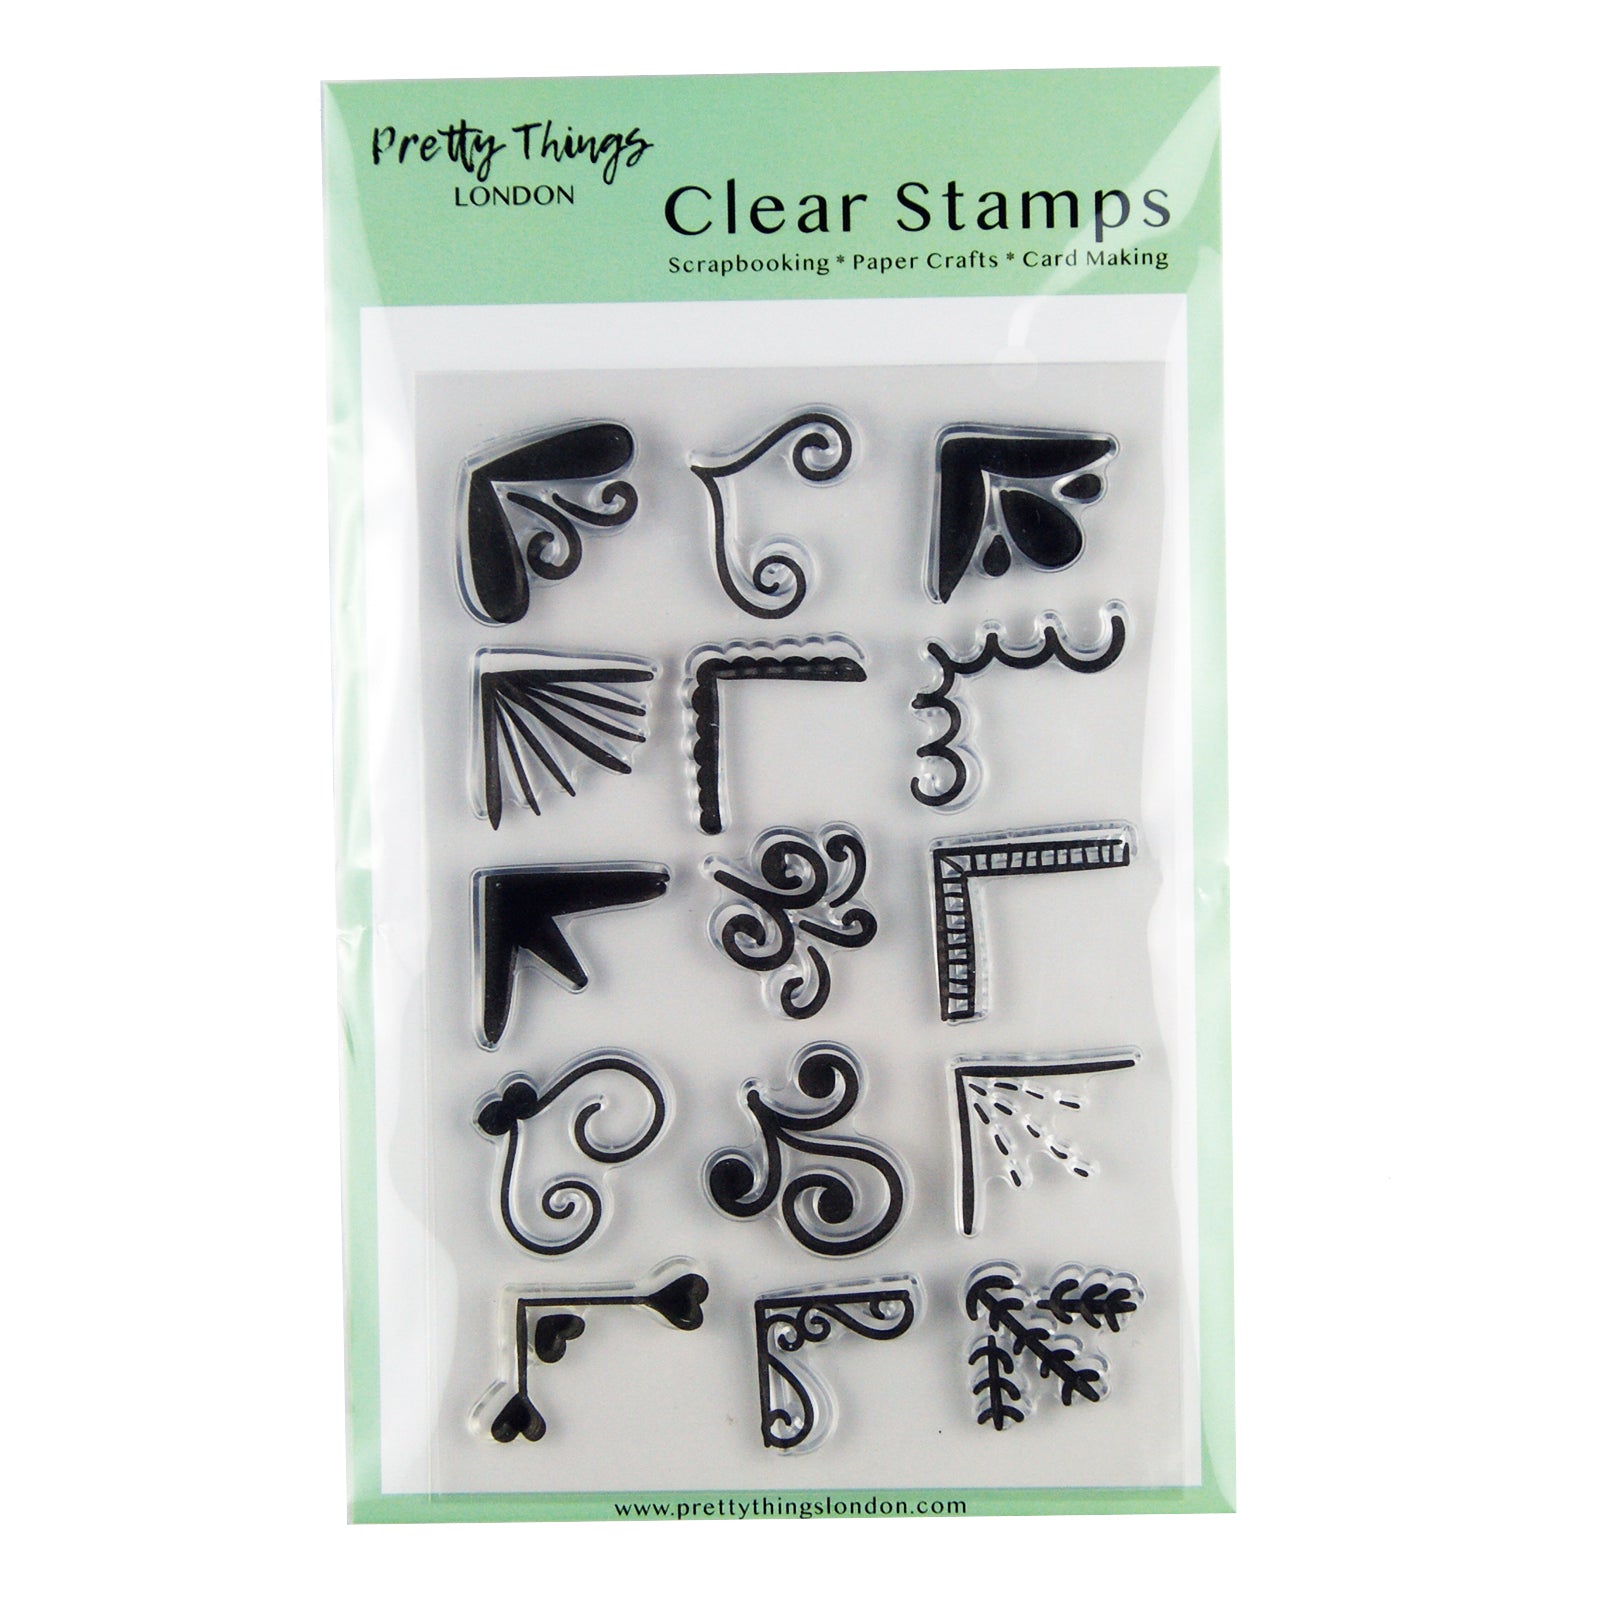 Clear stamp set, 15 corner stamps for card making and scrapbooking